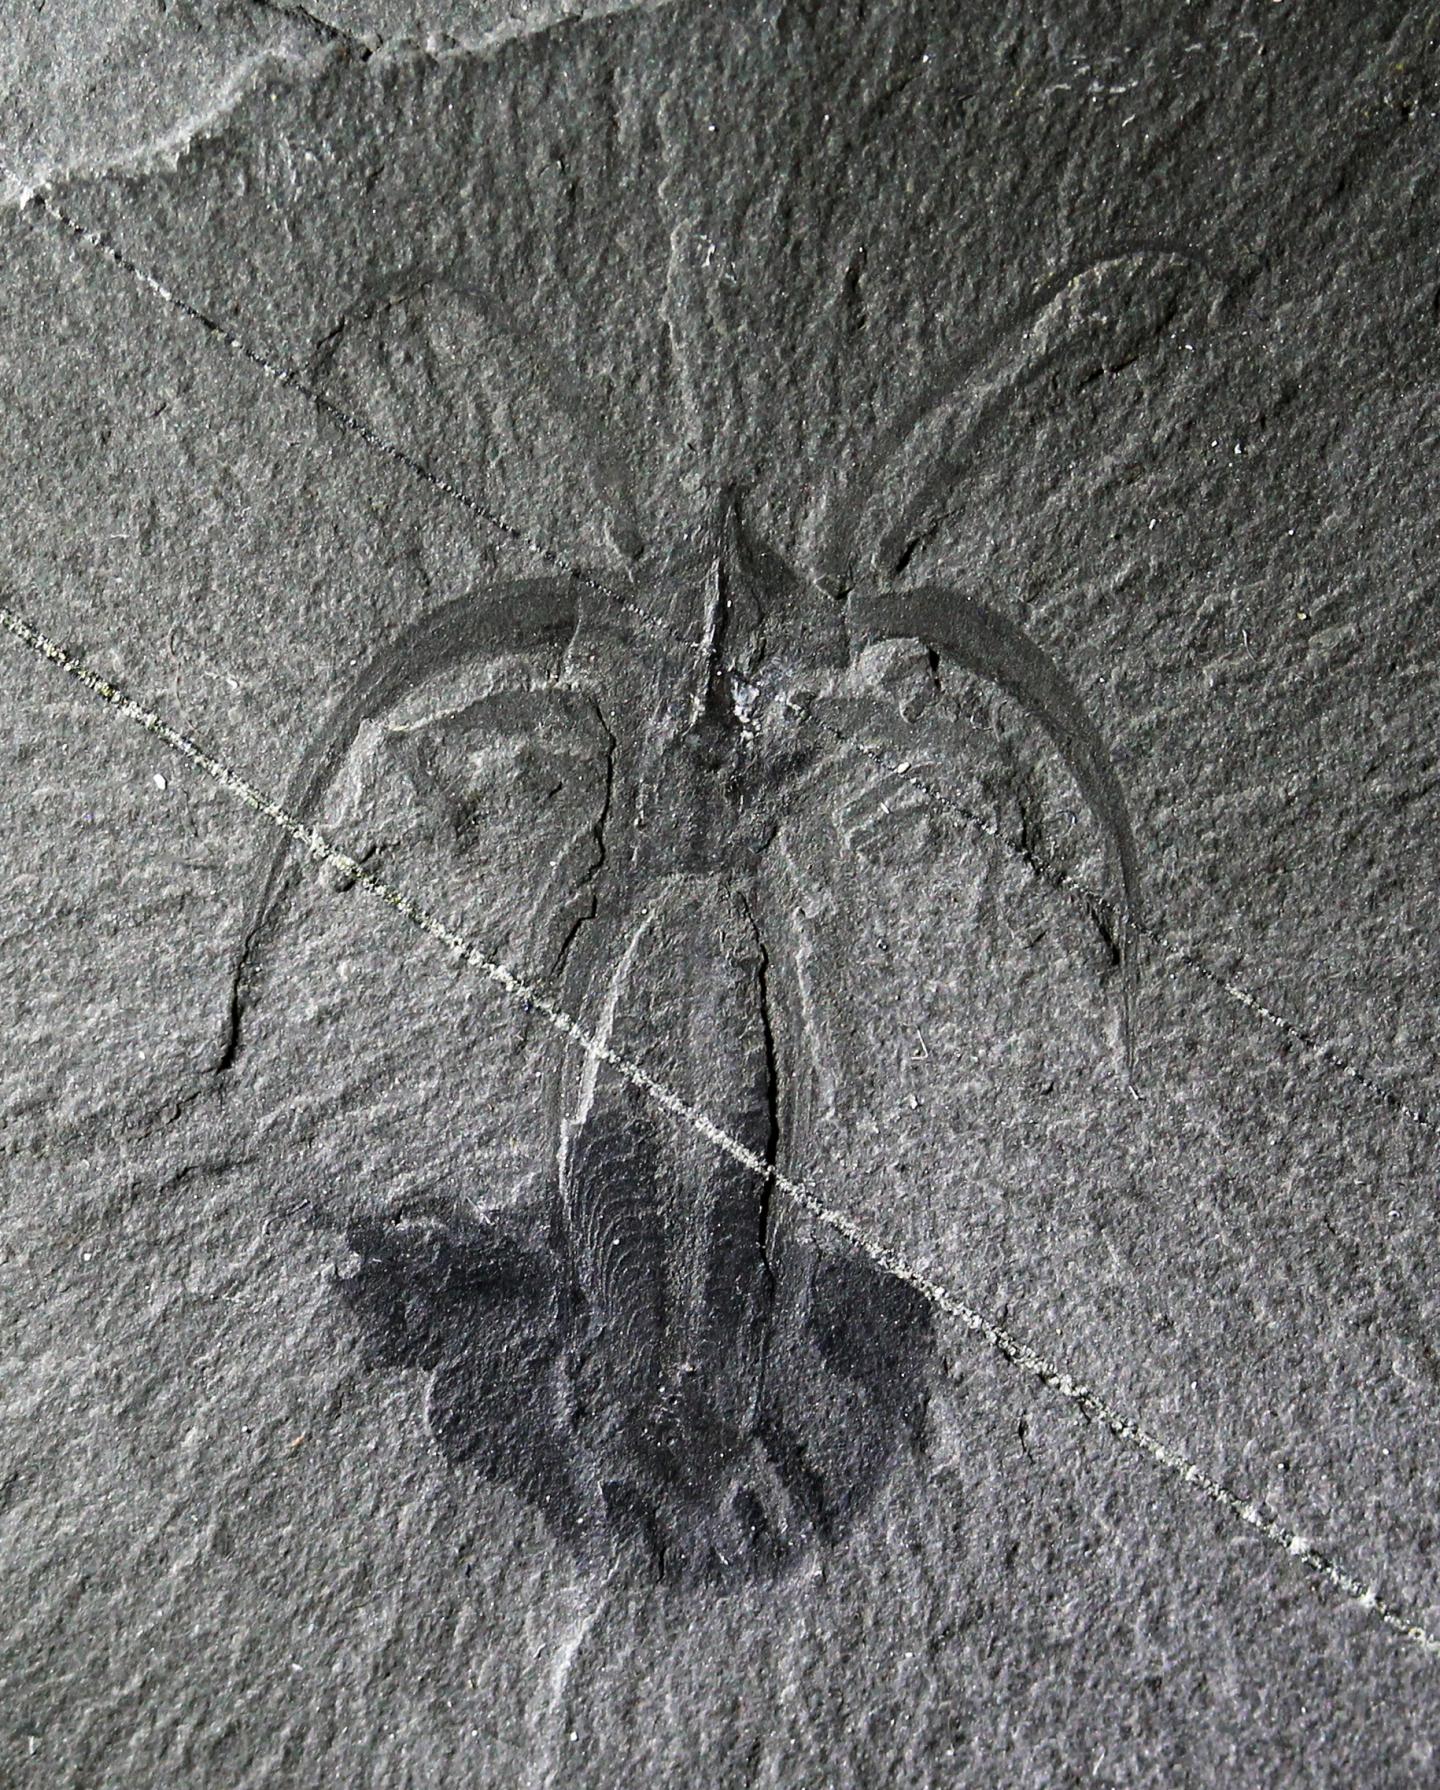 The Search For Burgess Shale-type Fossils